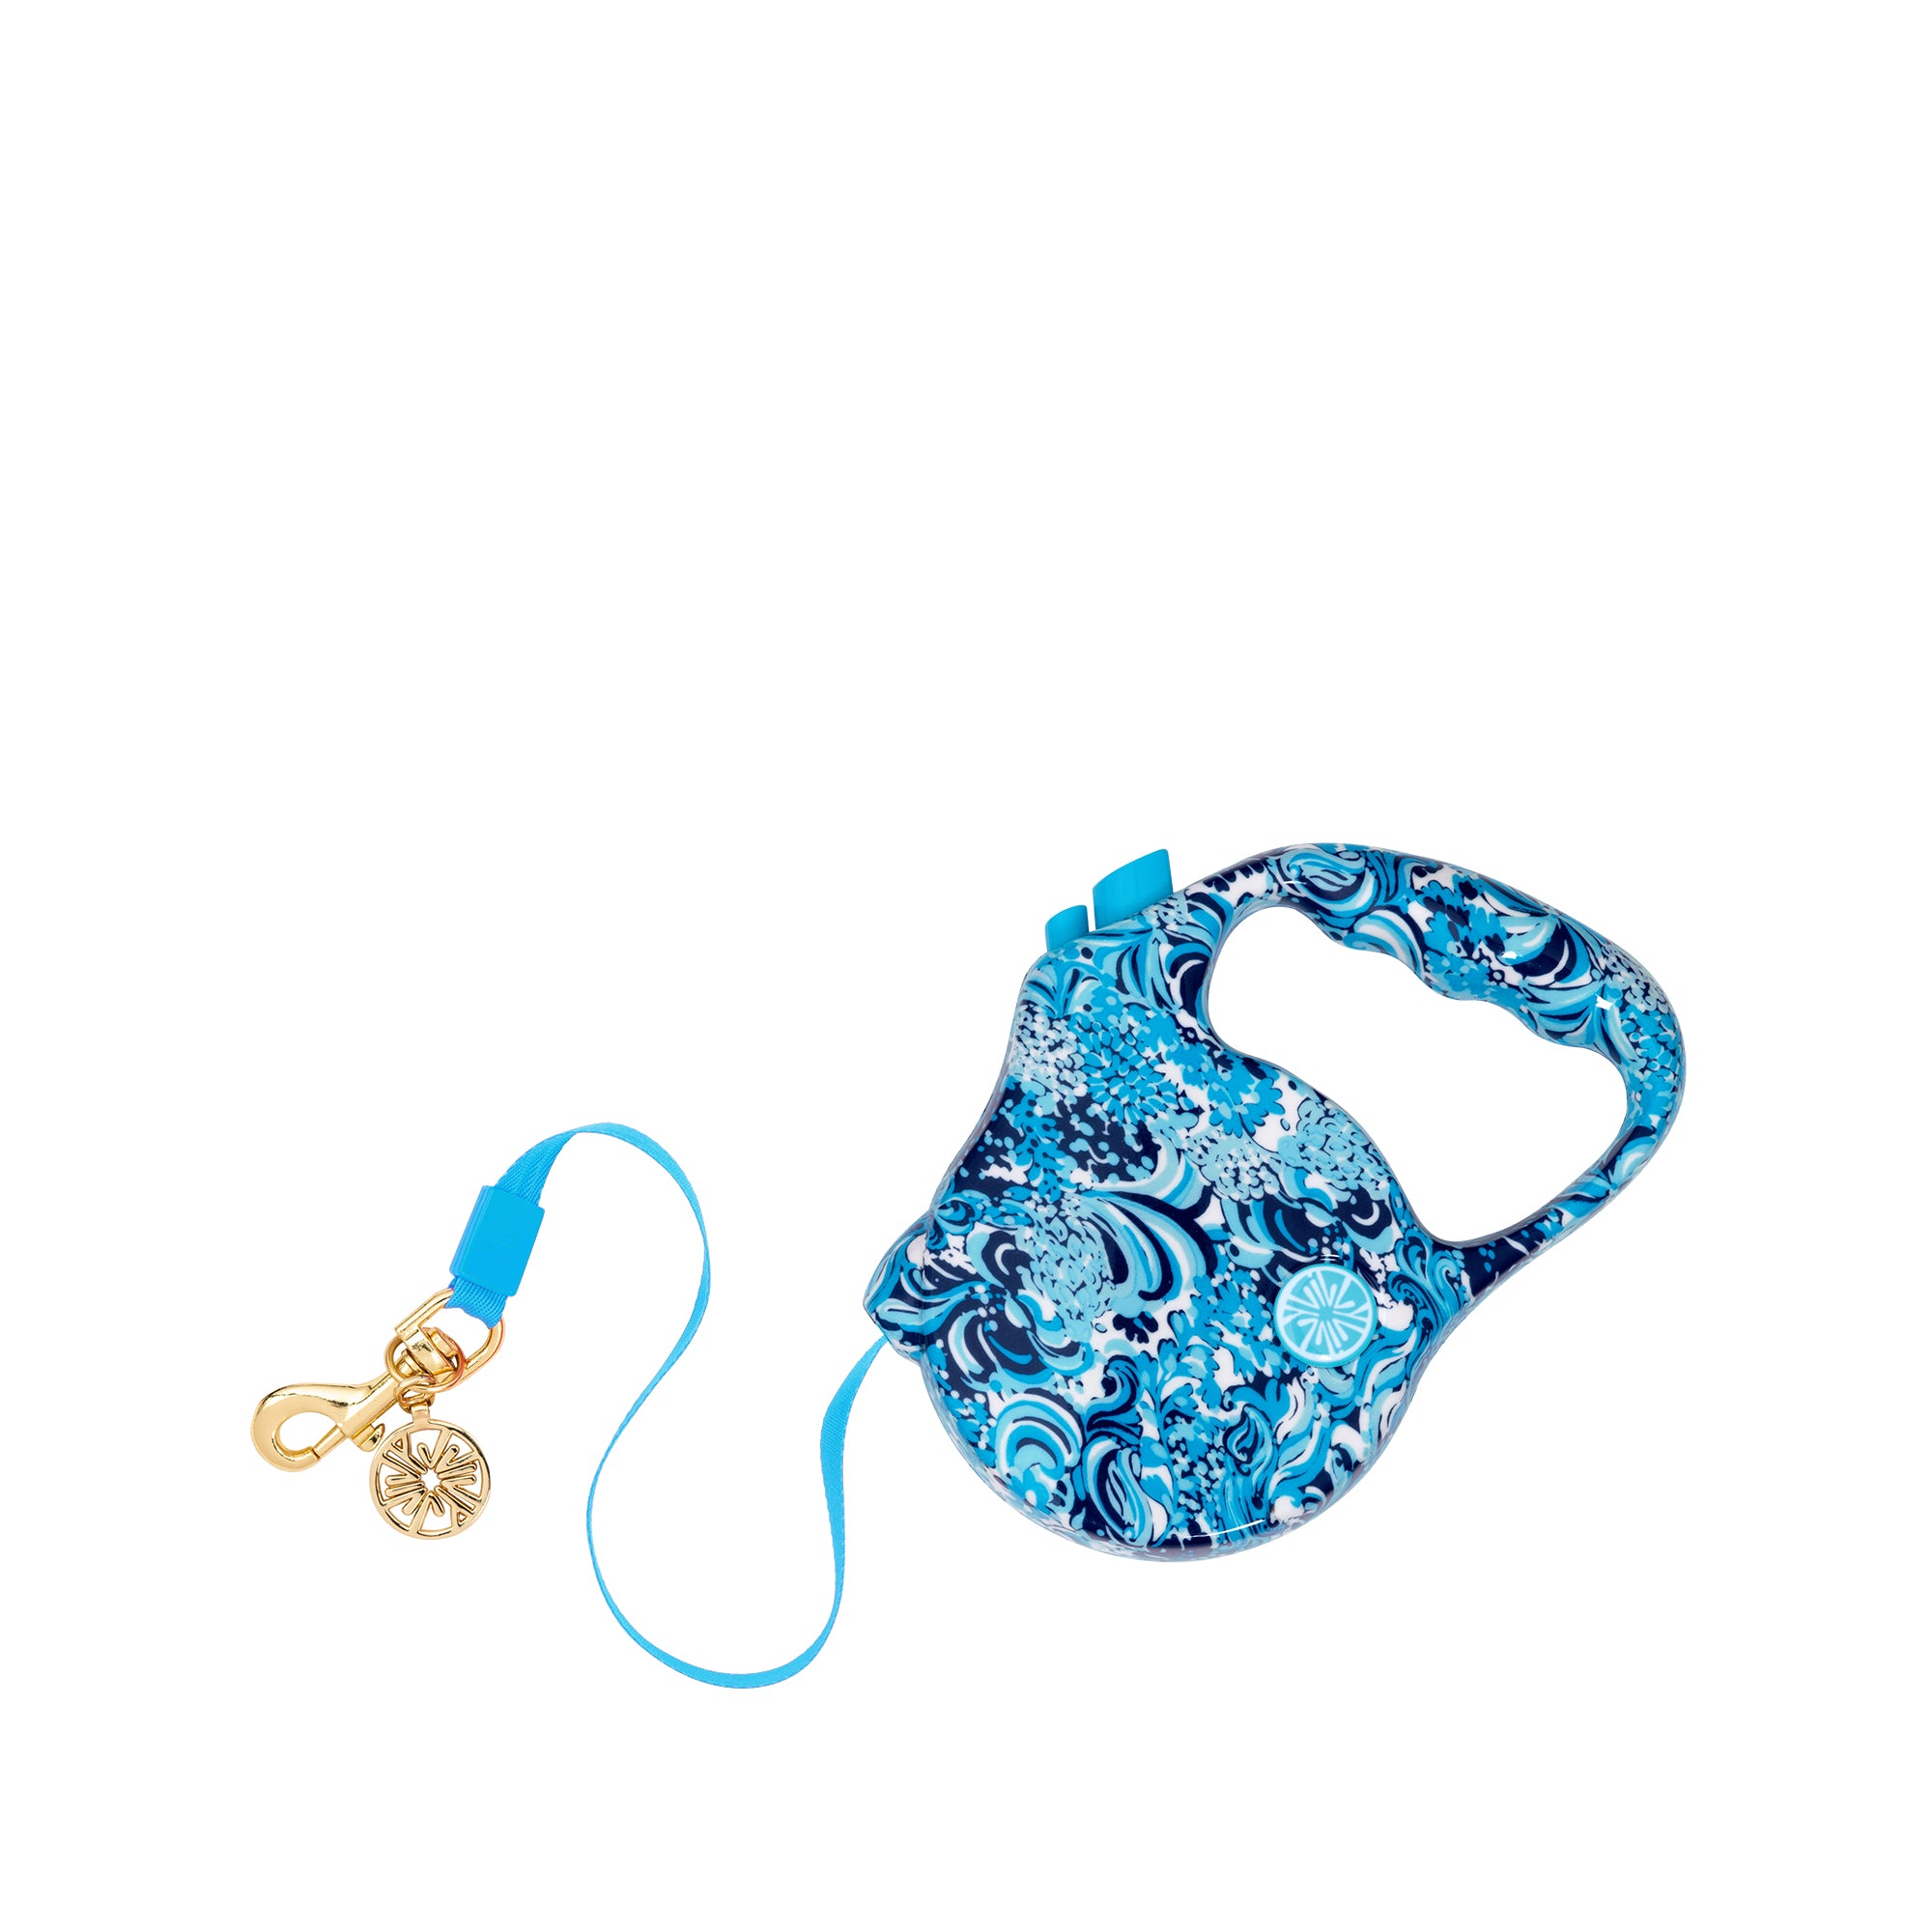 Retractable Dog Leash by Lilly Pulitzer - Mermazing